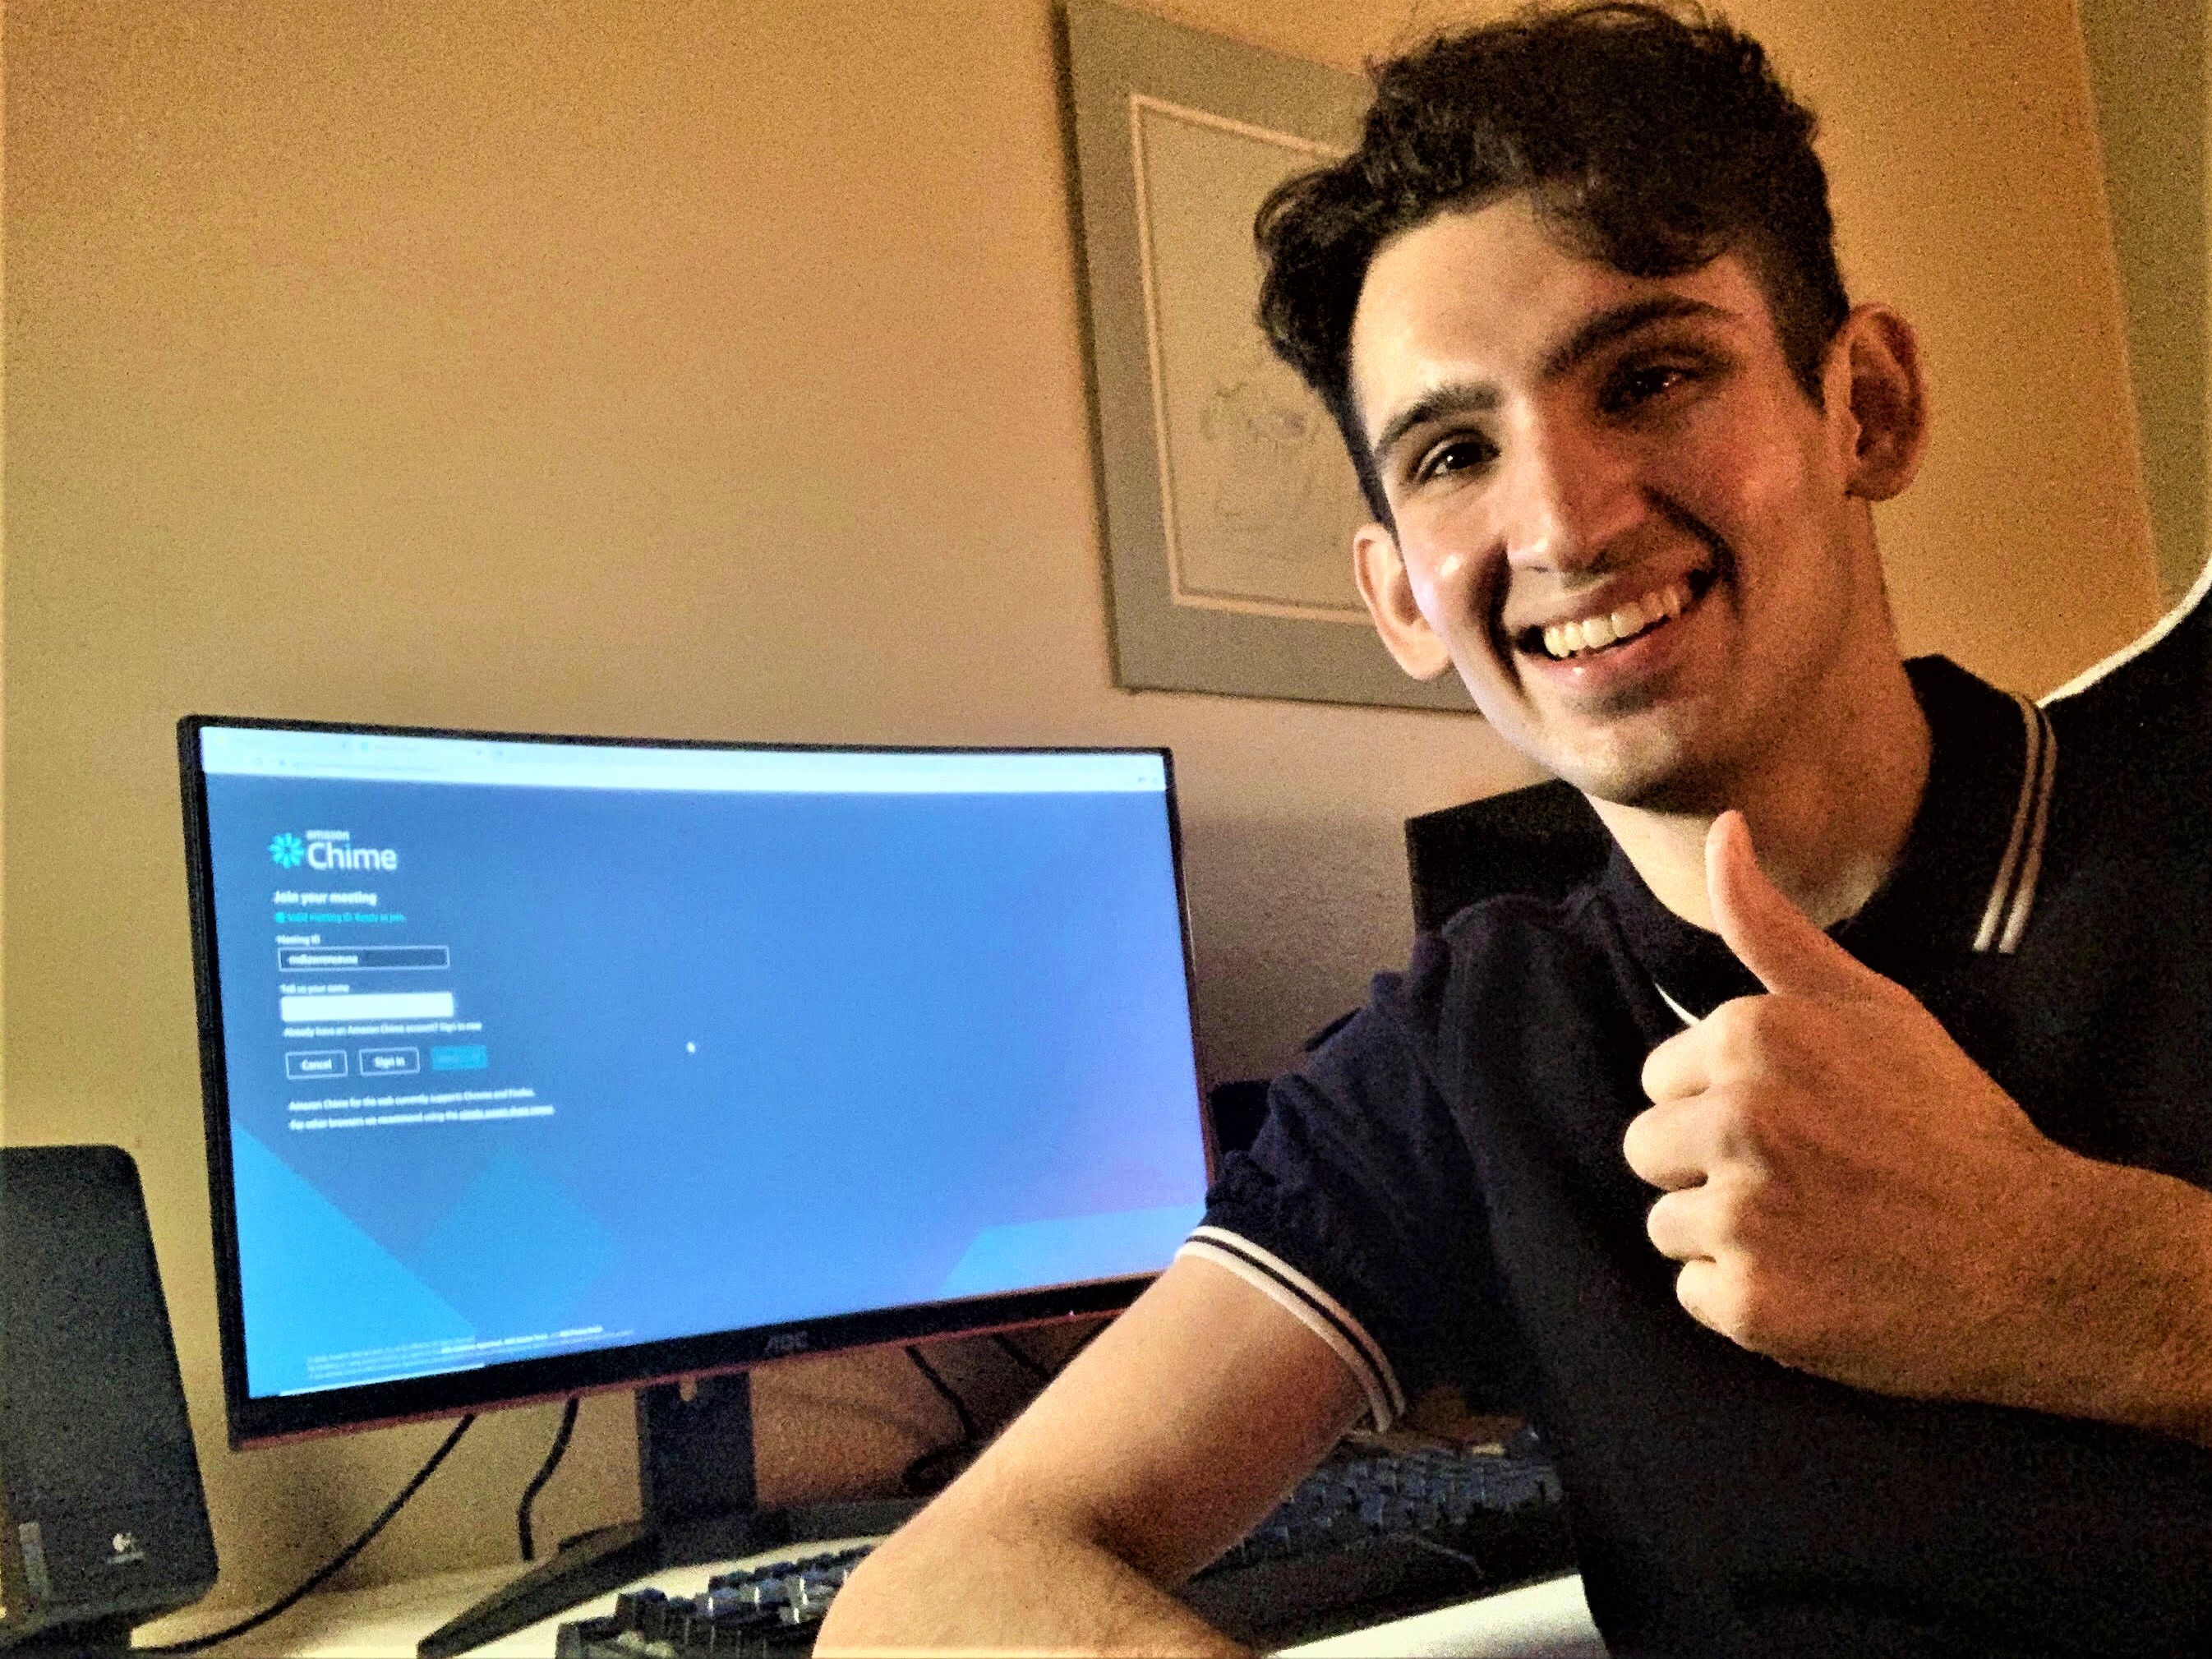 student Jason Bhimani smiling and giving thumbs up near computer